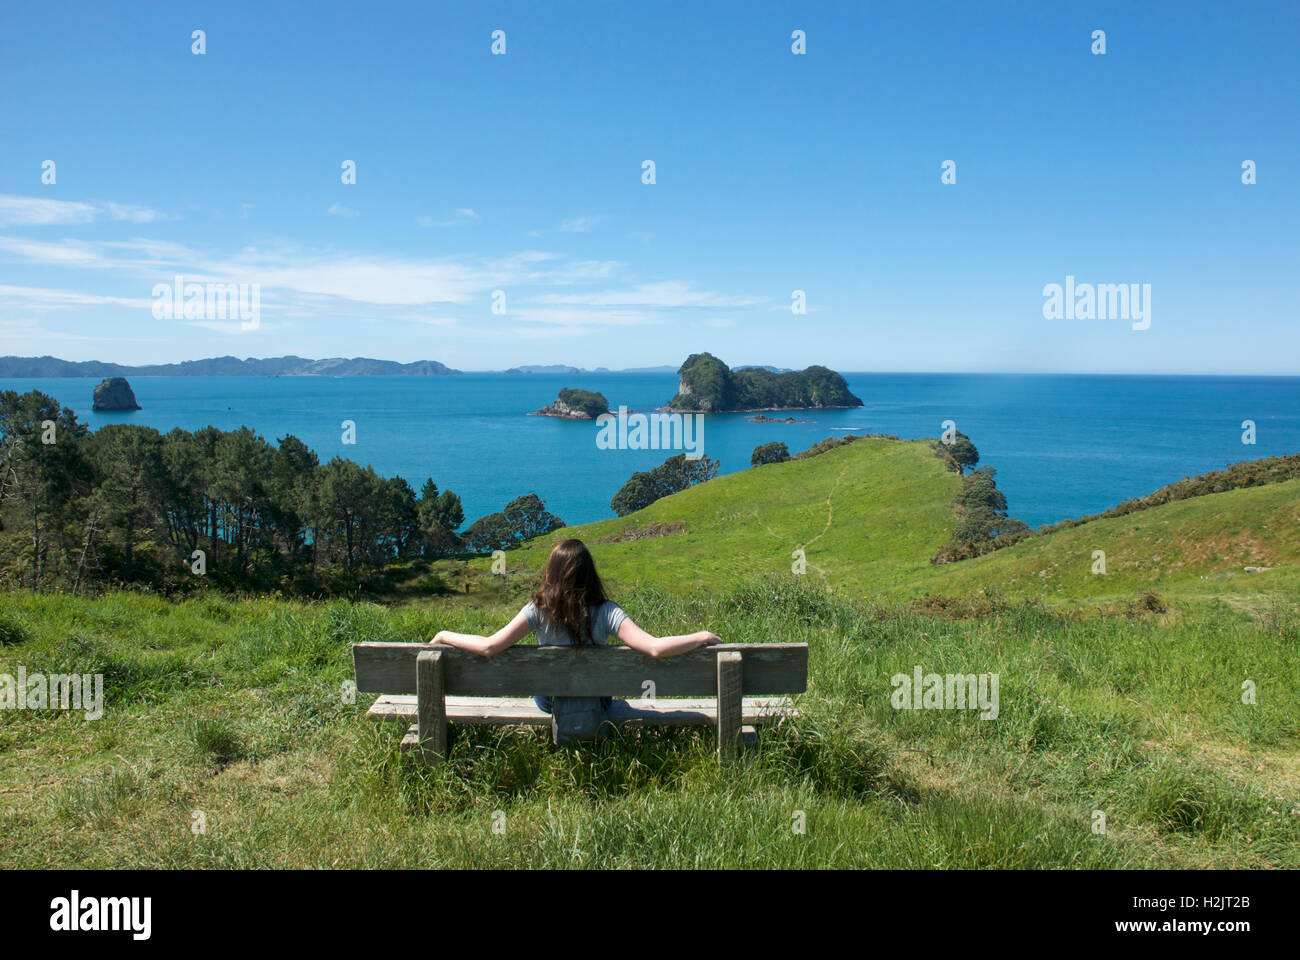 Looking out to sea at the Coromandel Peninsula in New Zealand. Stock Photo